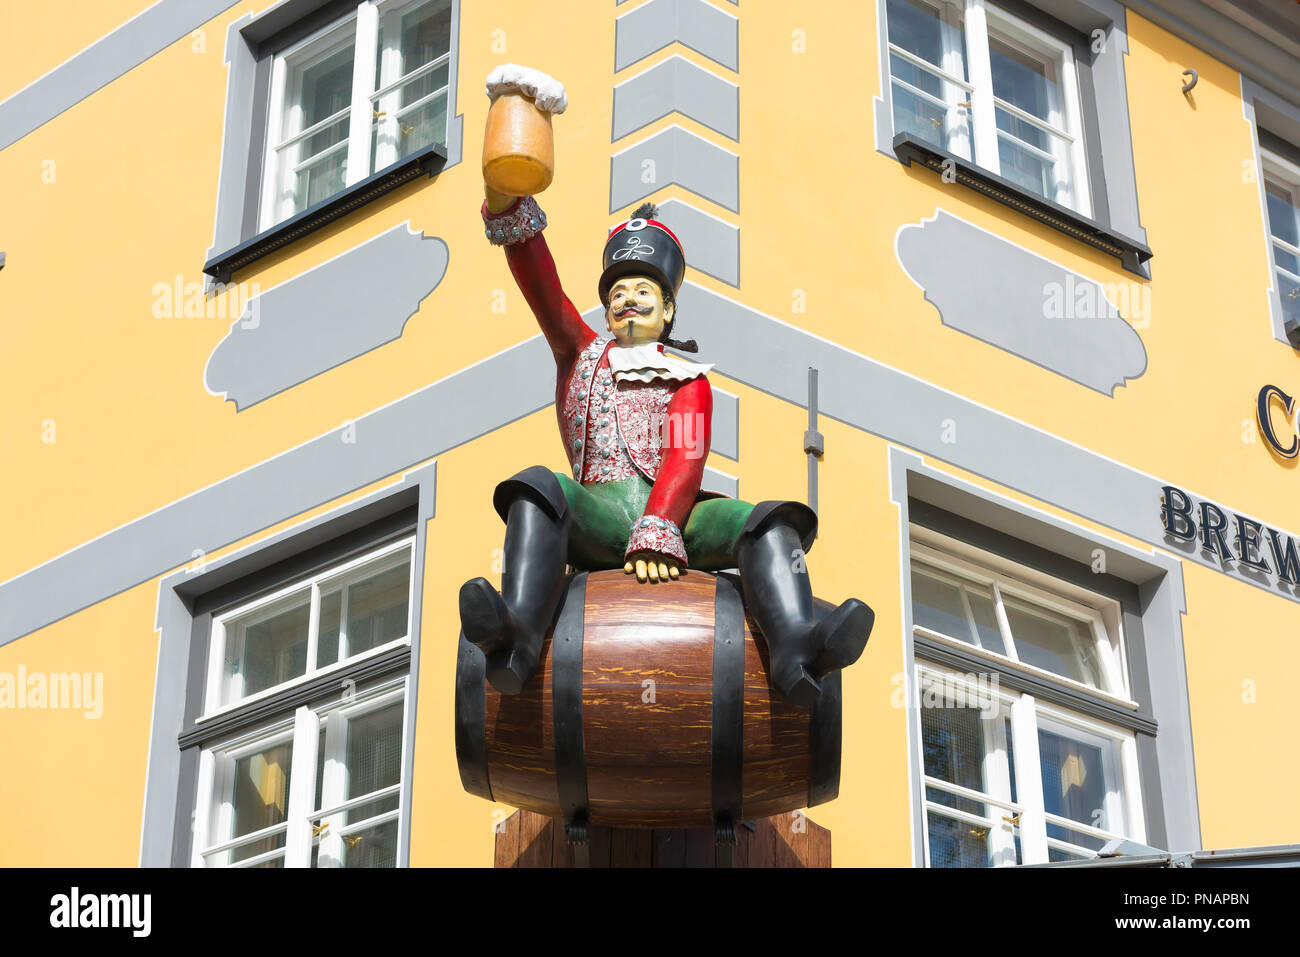 Beer sign, view of a sign in the form of a !8th century hussar raising a frothing stein of beer above a beer garden in Livu Laukums in Riga, Latvia. Stock Photo